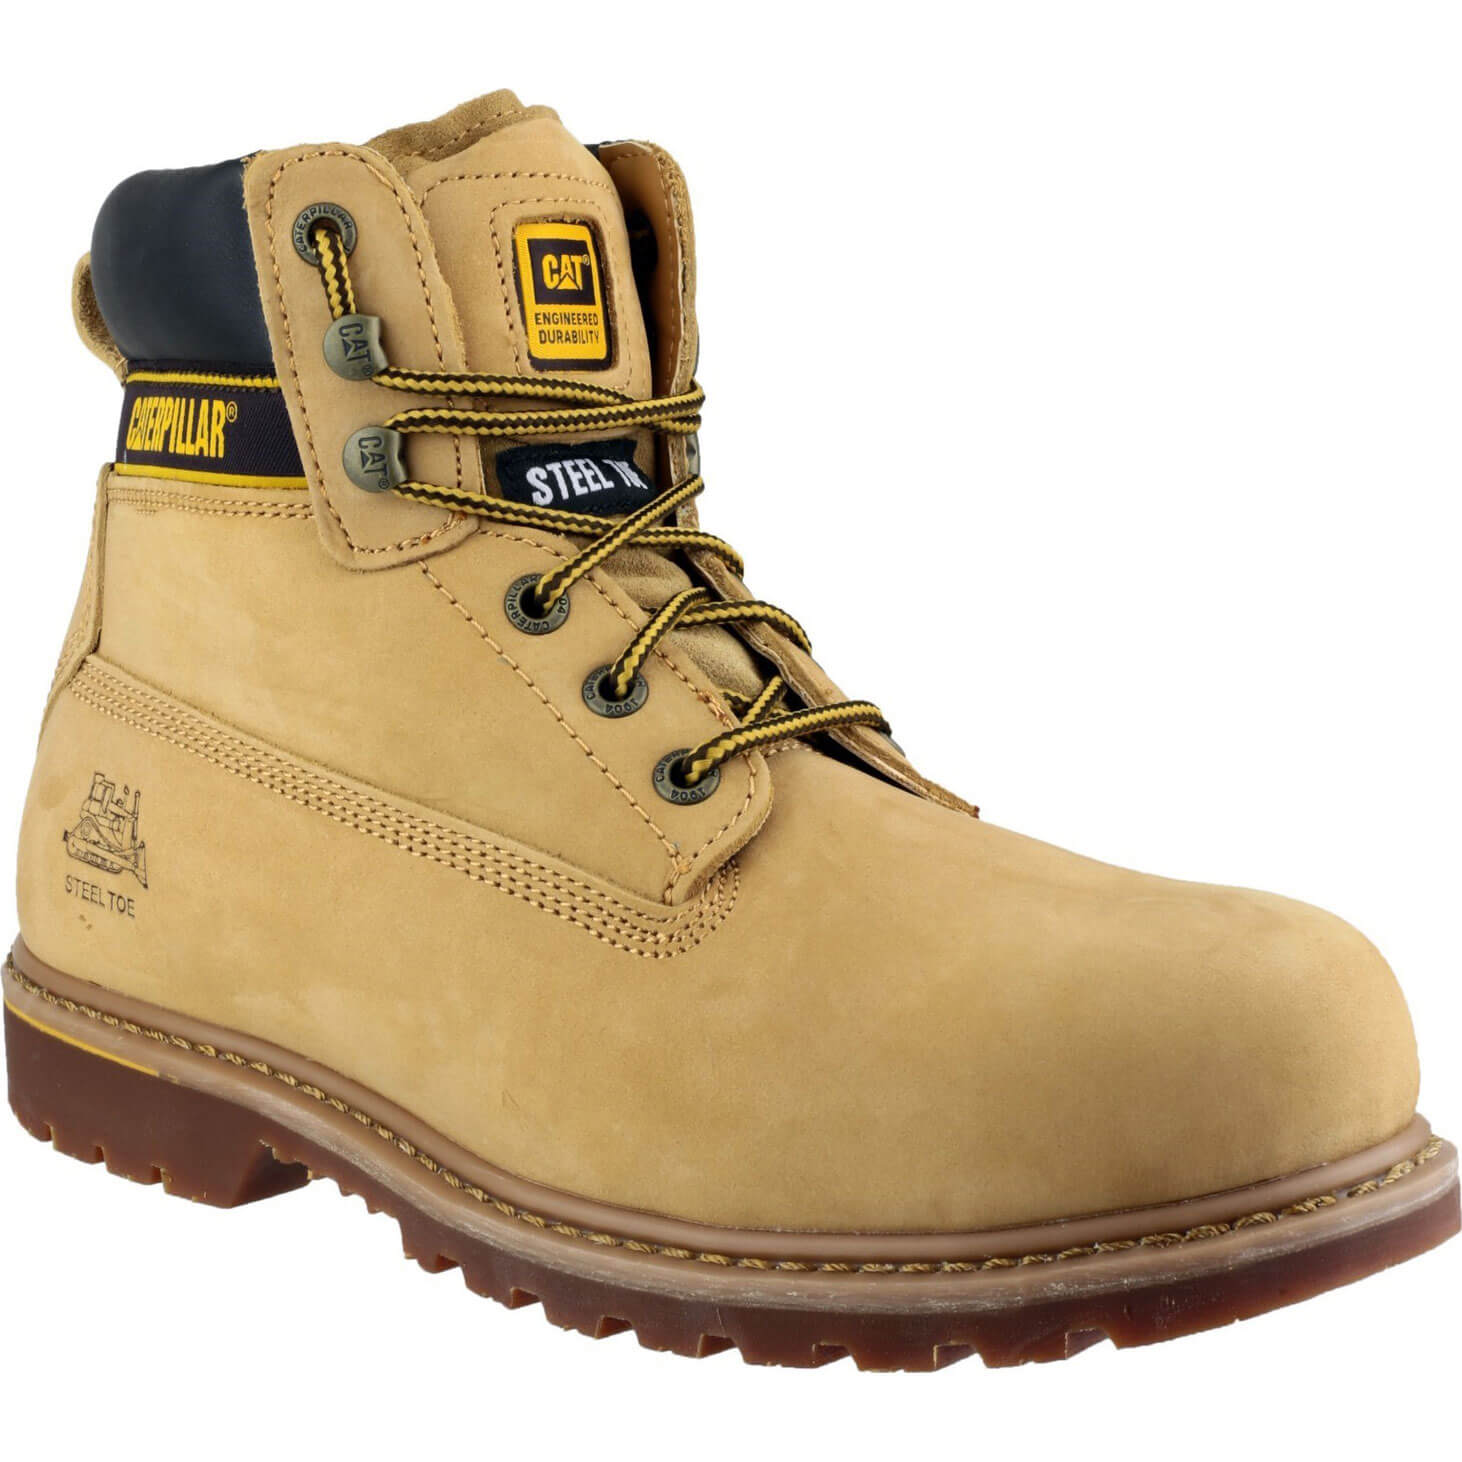 Caterpillar Mens Holton Safety Boots Honey Size 6